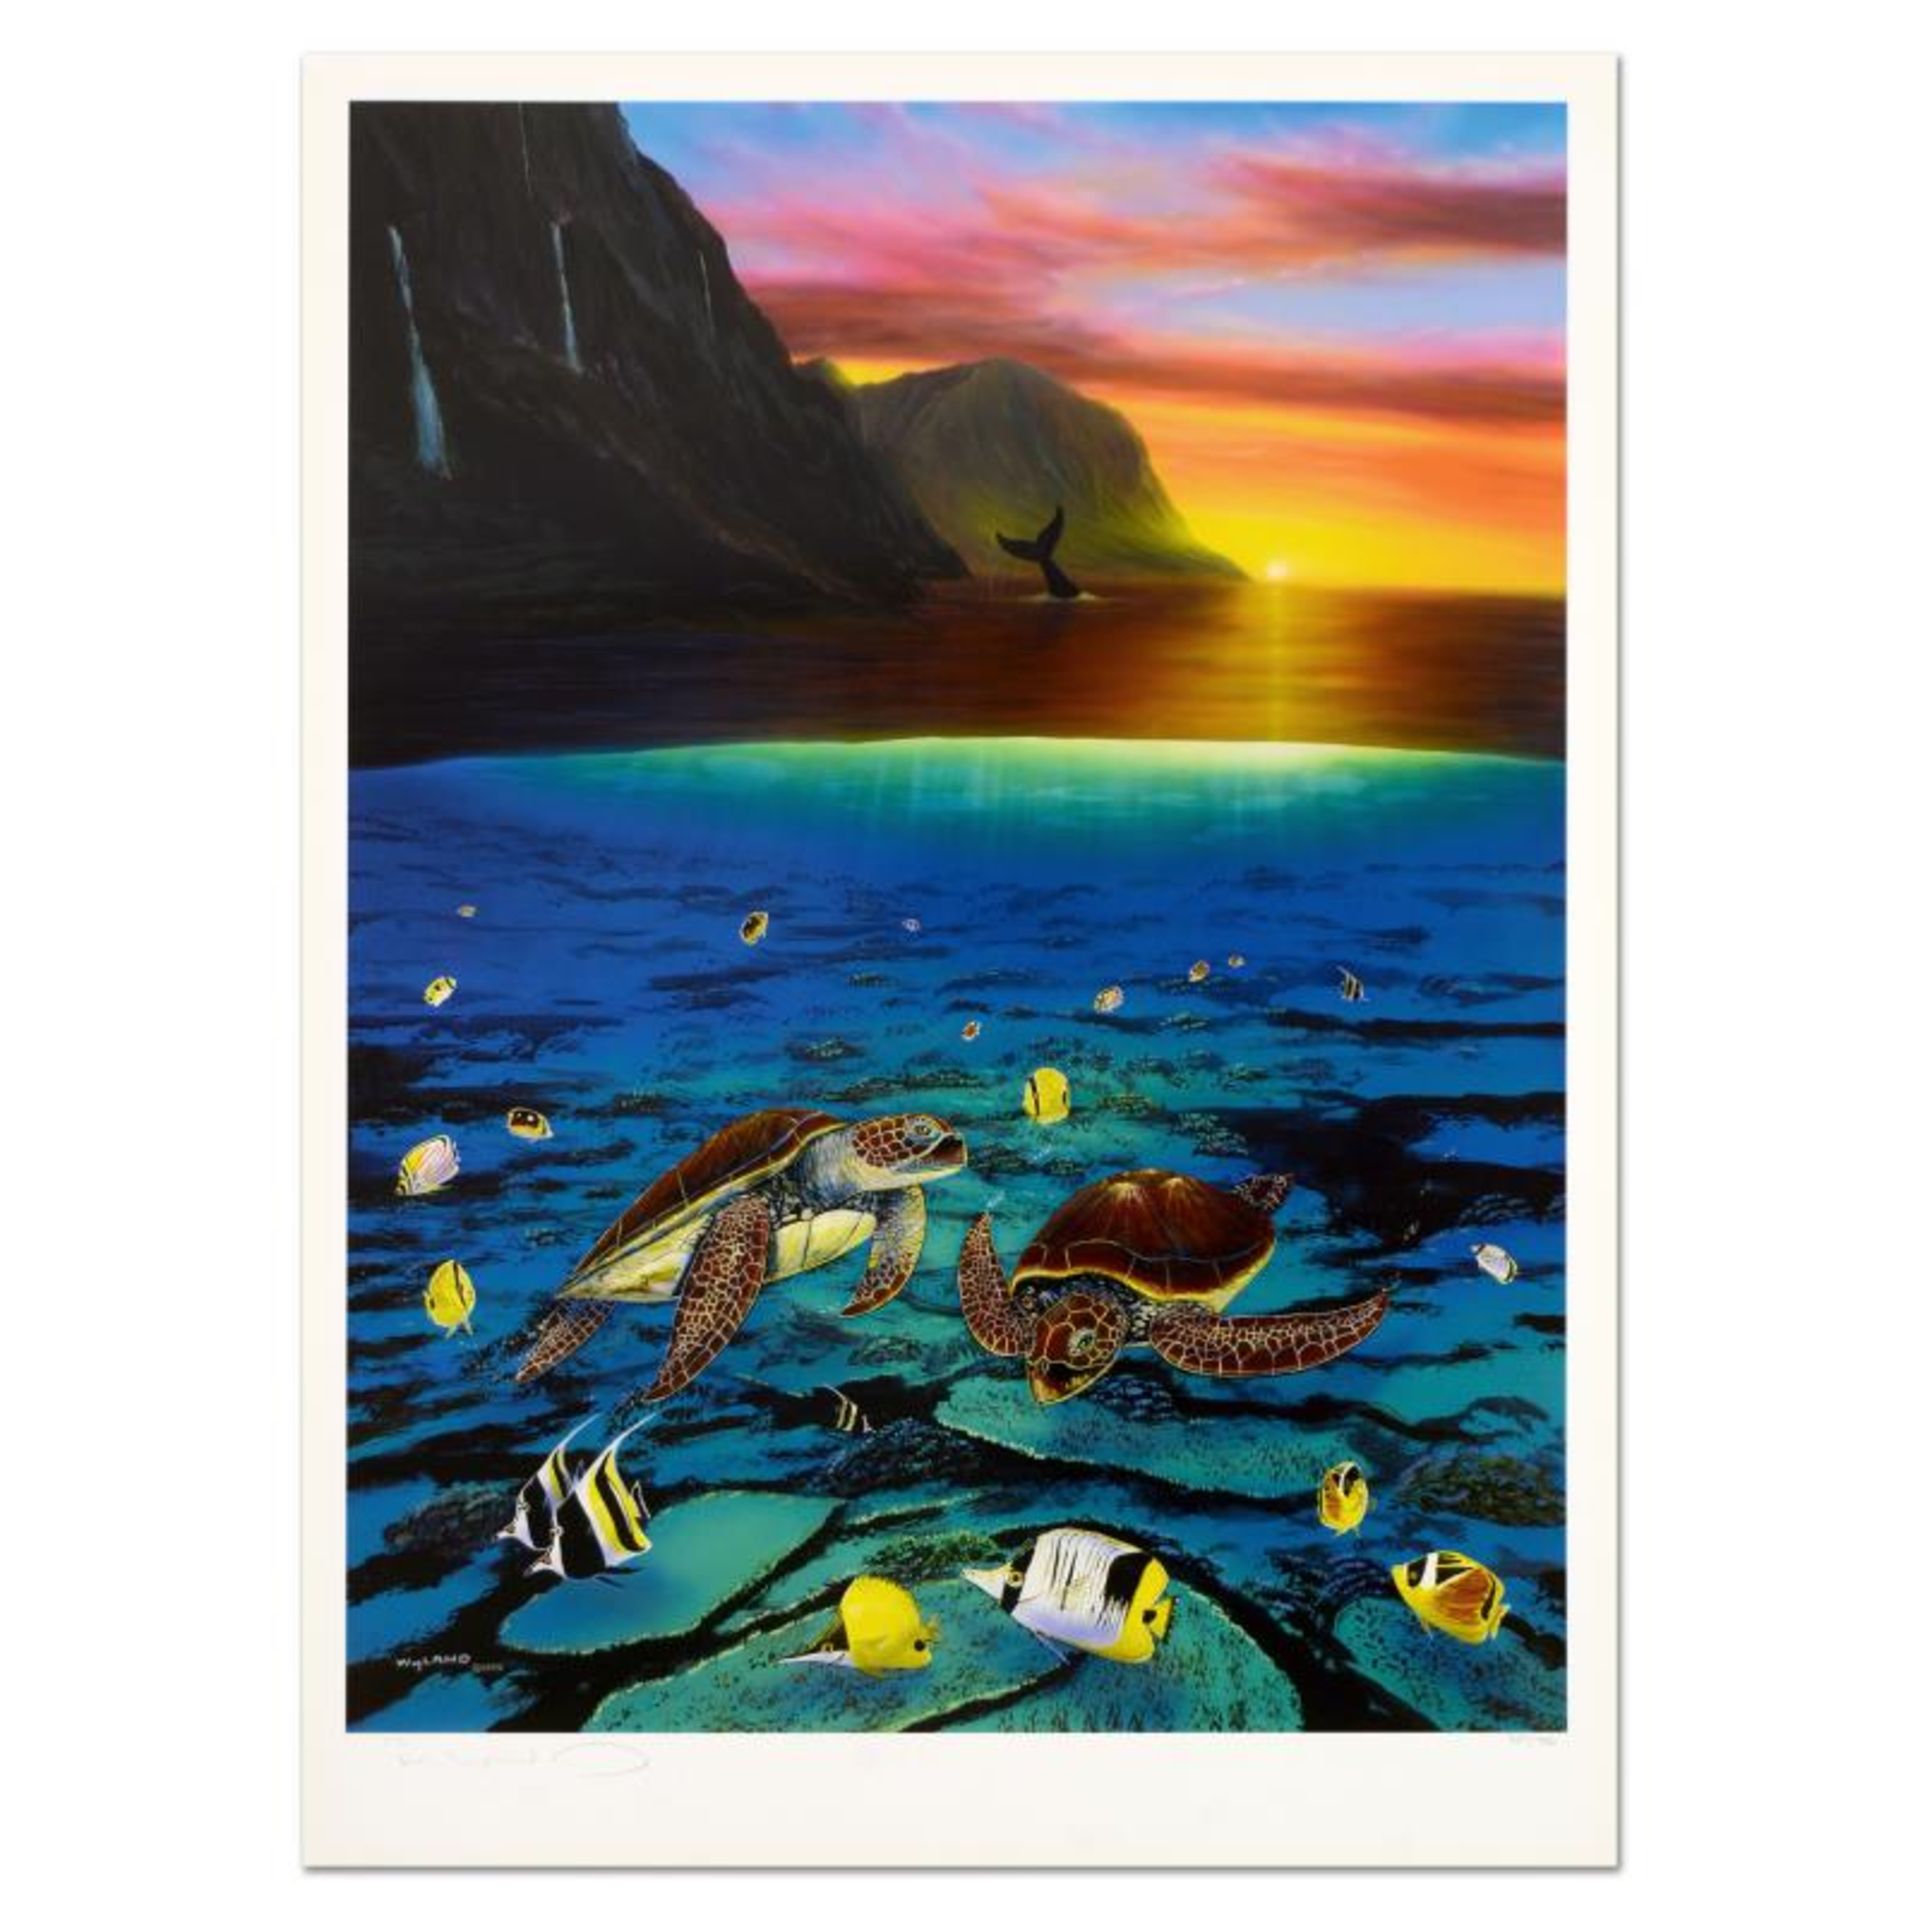 Wyland, "Ancient Mariner" Limited Edition Lithograph, Numbered and Hand Signed w